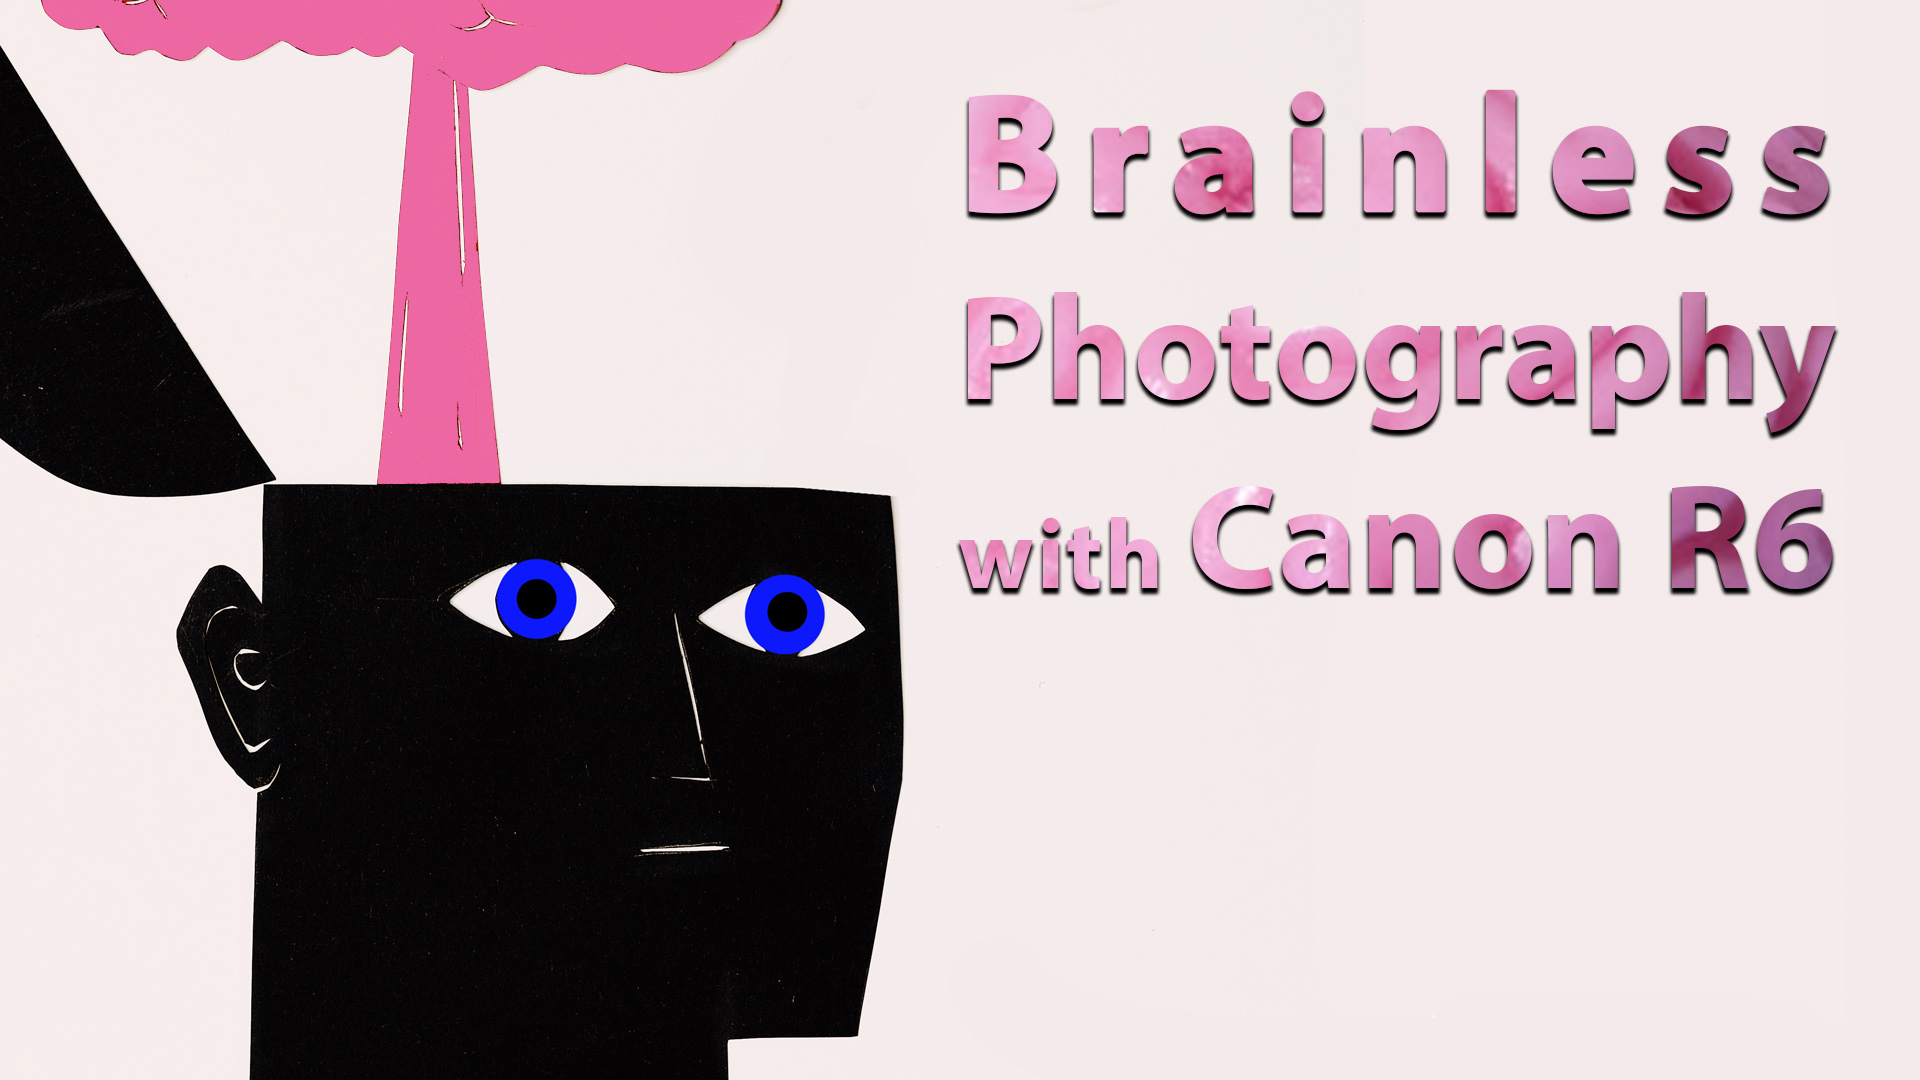 Brainless Photography with Canon R6